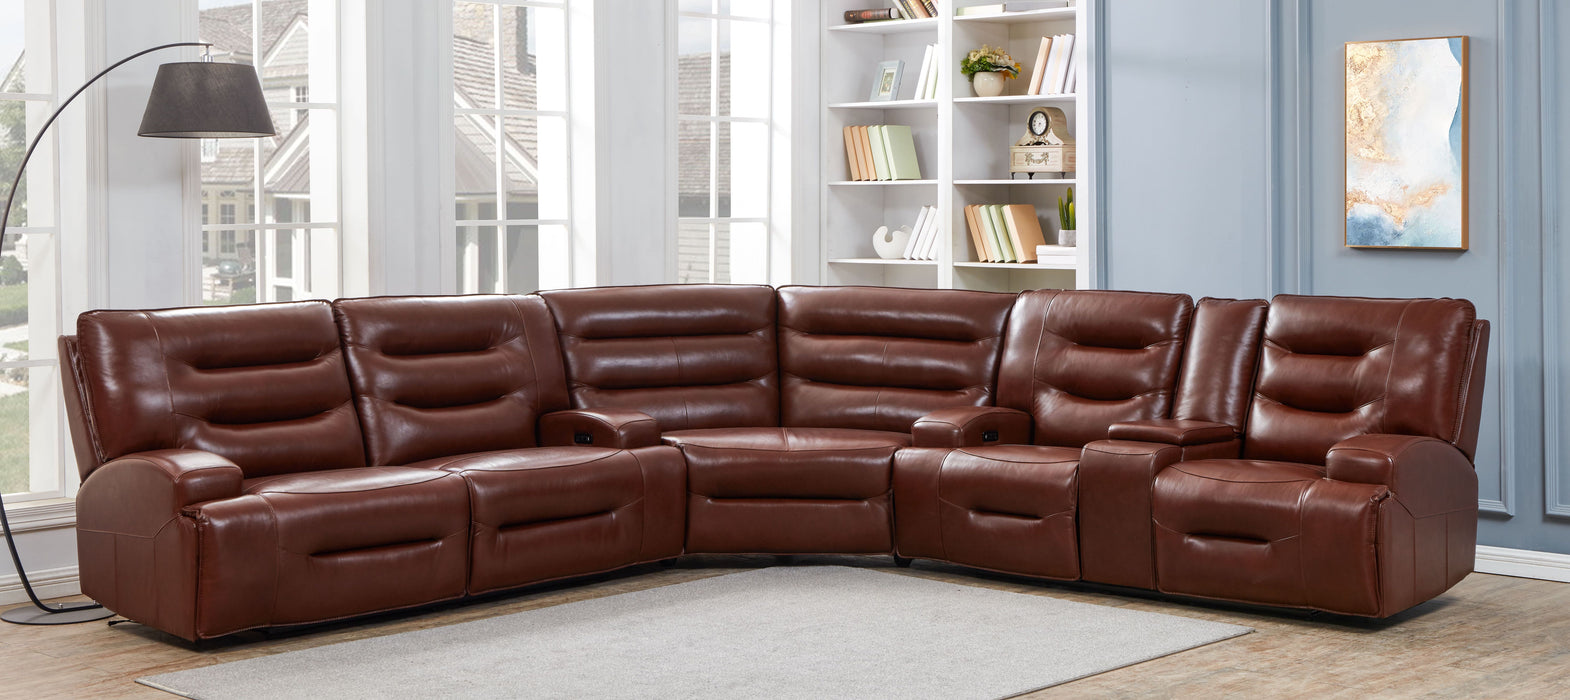 McElroy II Power Reclining Leather Sectional